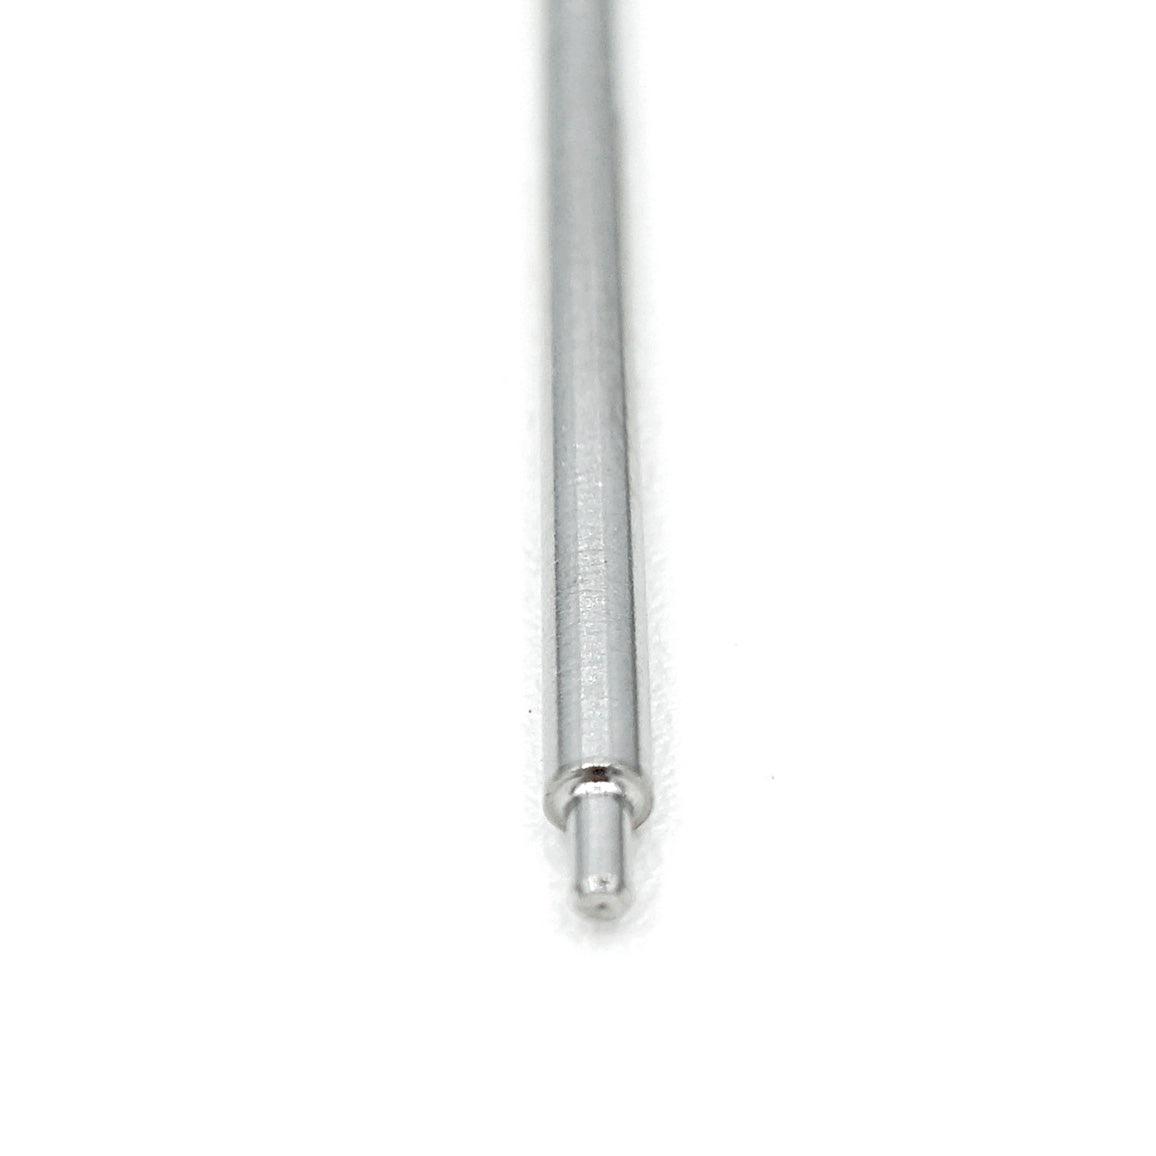 Stiletto Piercing Tapers - 14G - Piercing Tapers - Mithra Tattoo Supplies Canada